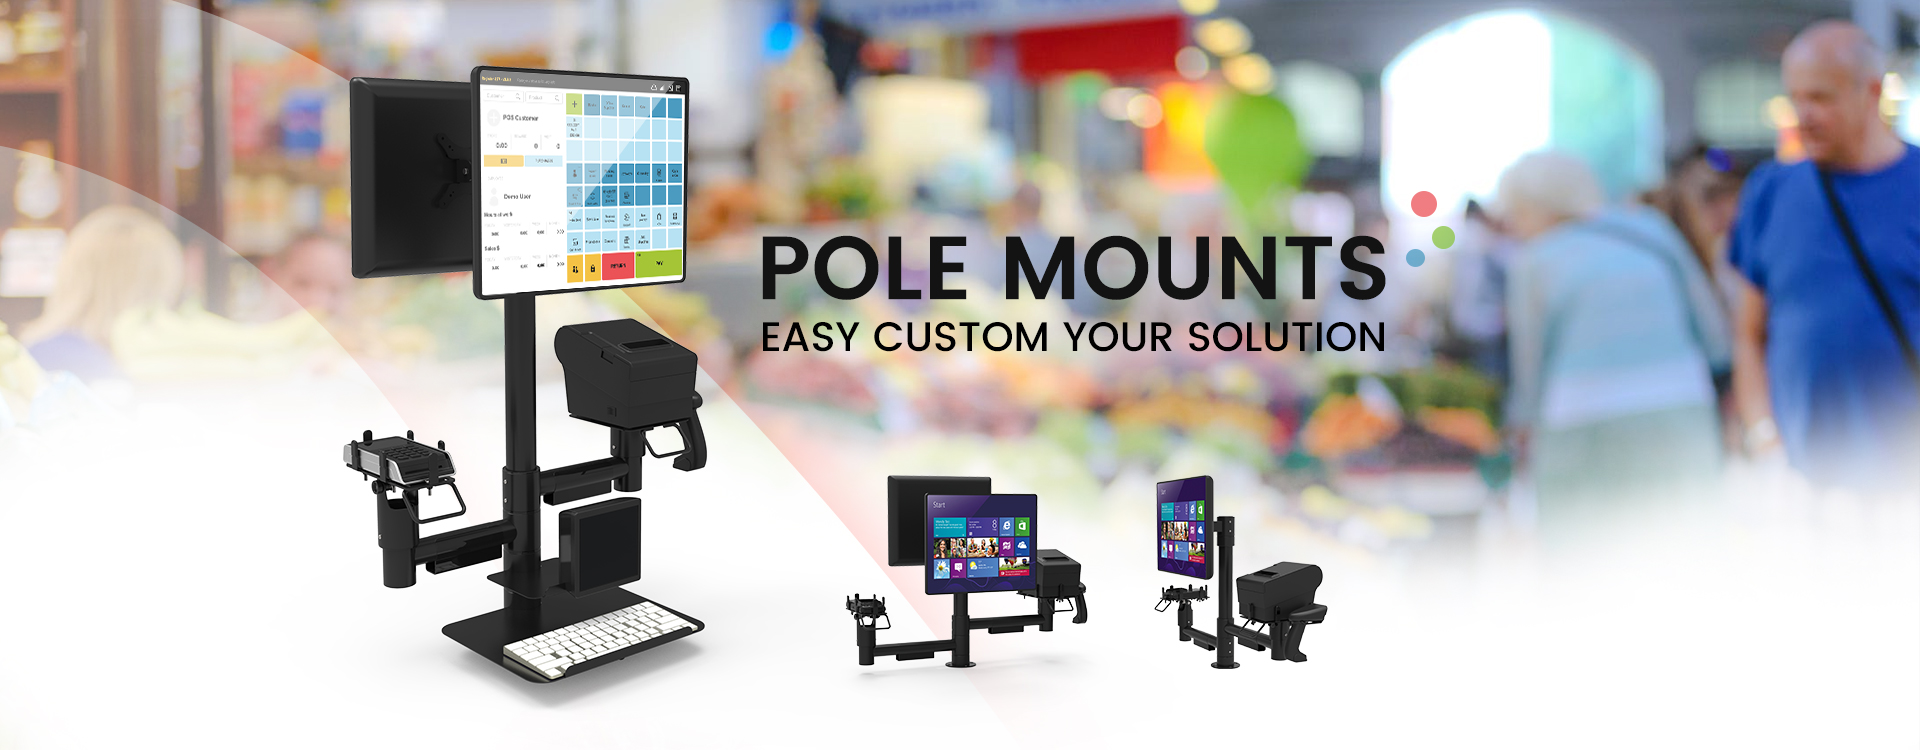 Pole mount POS stands